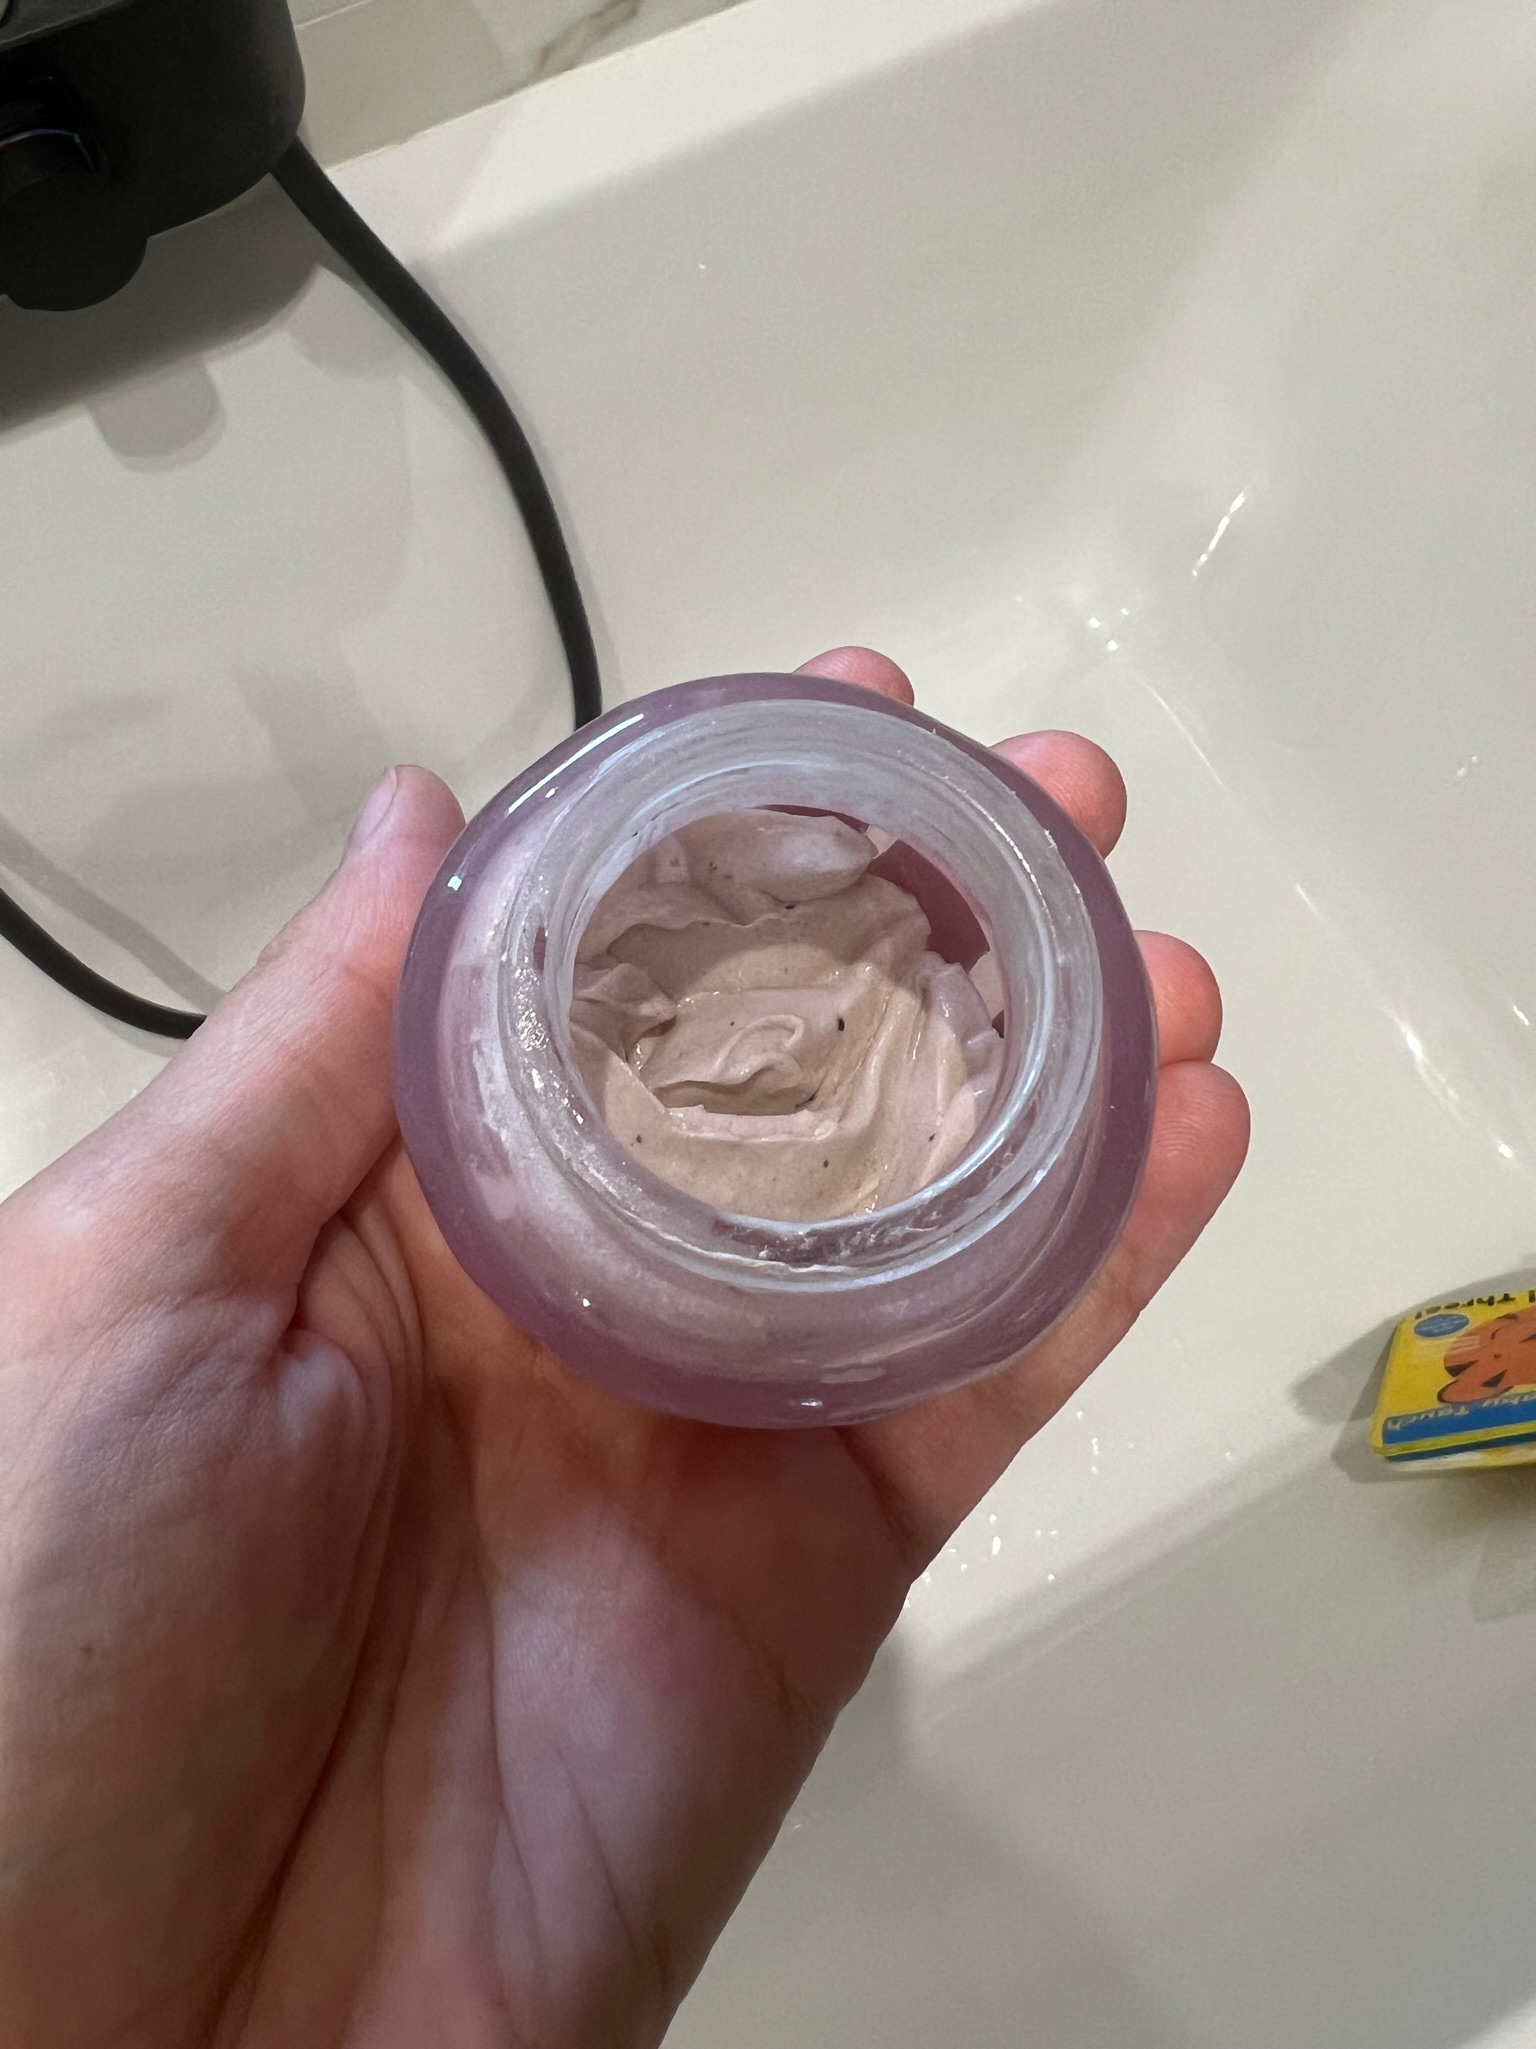 Review: My Experience with Glow Recipe’s Watermelon Glow Hyaluronic Clay Pore-Tight Facial